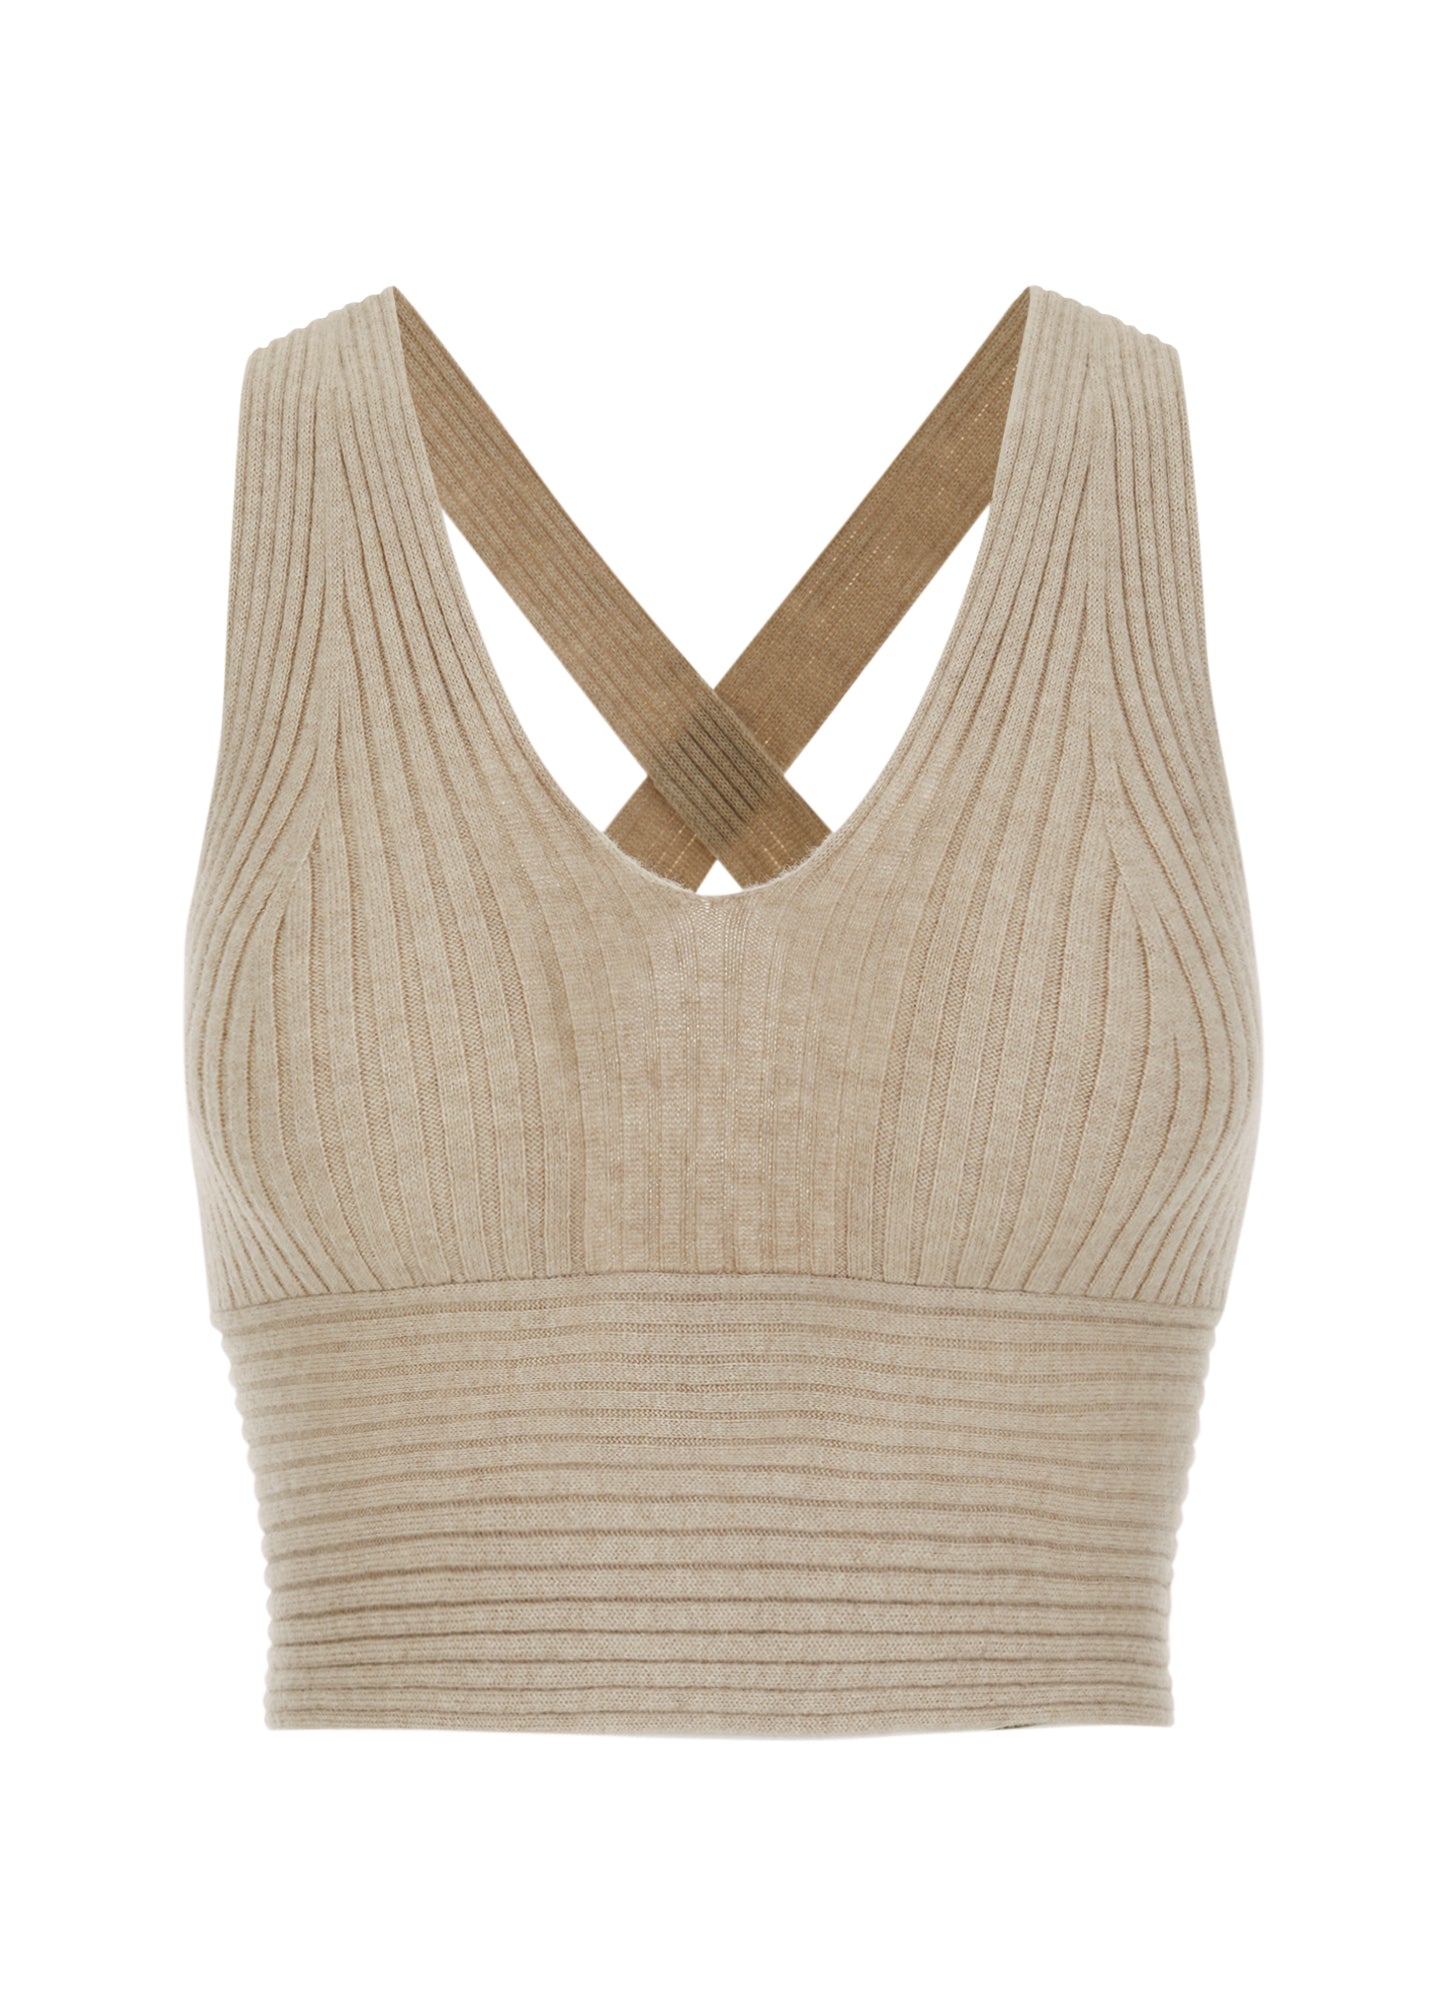 Cashmere knit cropped top bralette crossed back in sand